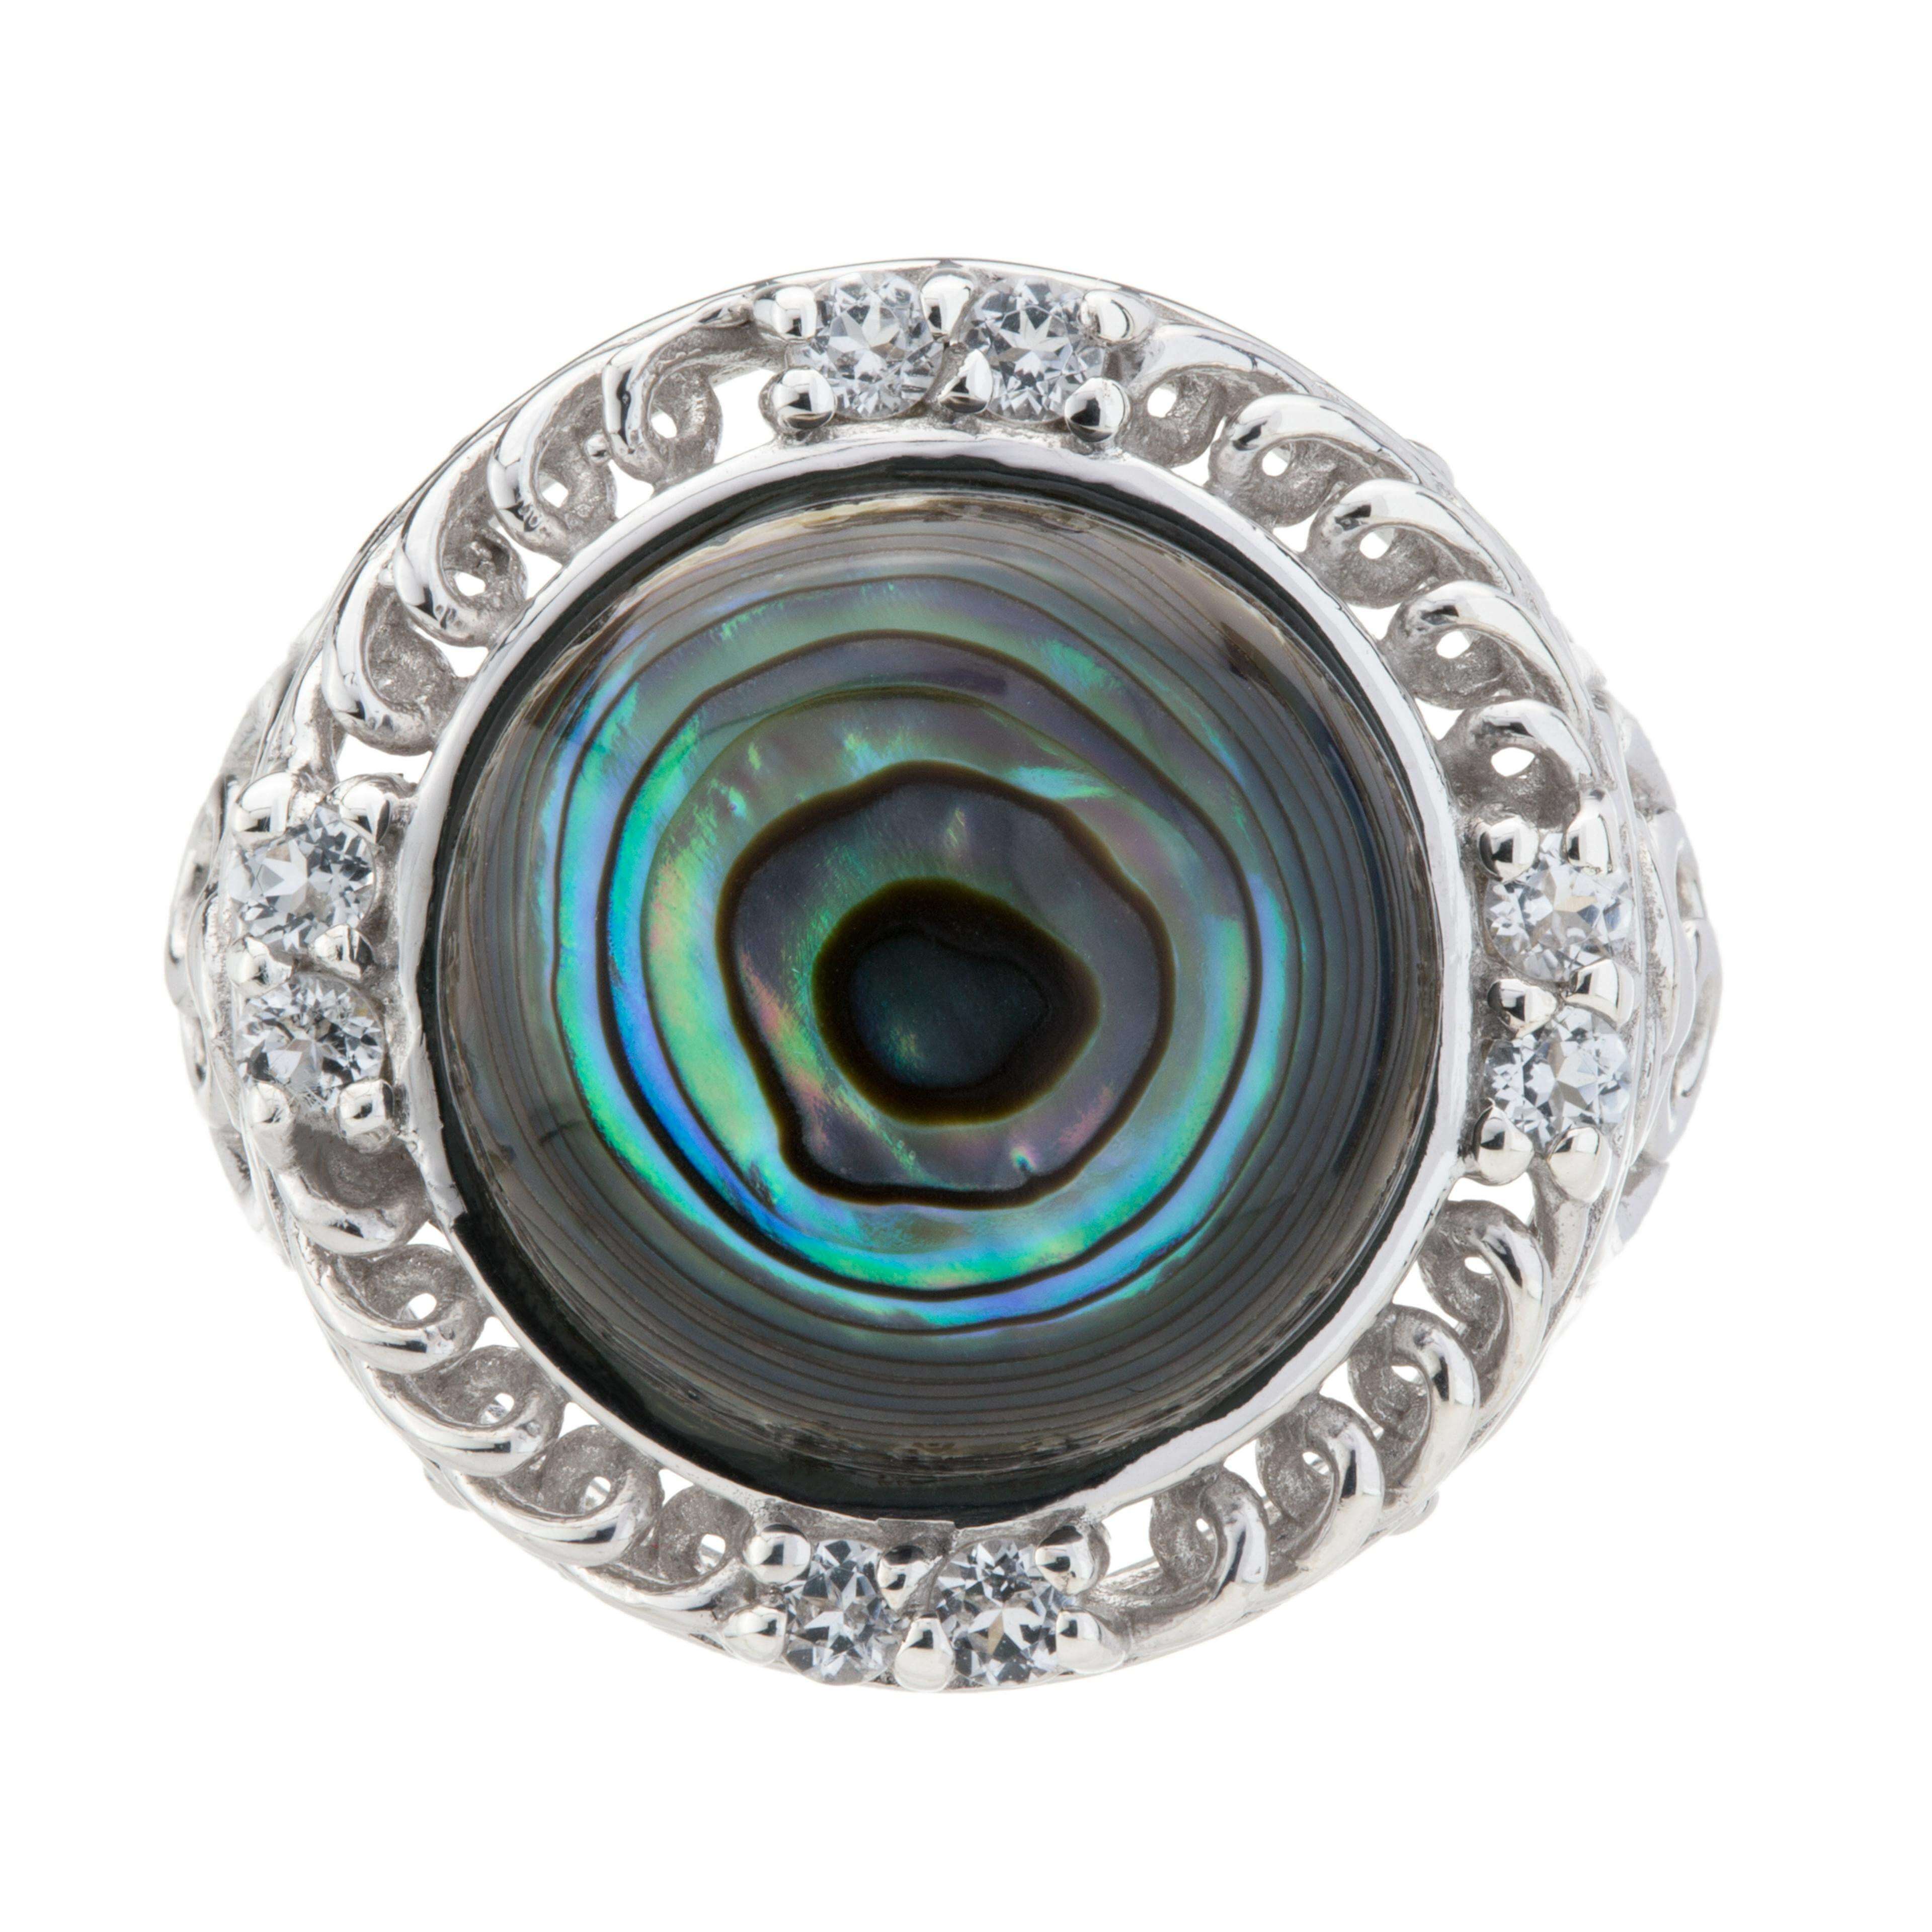 Silver Abalone & White Topaz Textured Ring Size 7 - Shop Thrifty Treasures